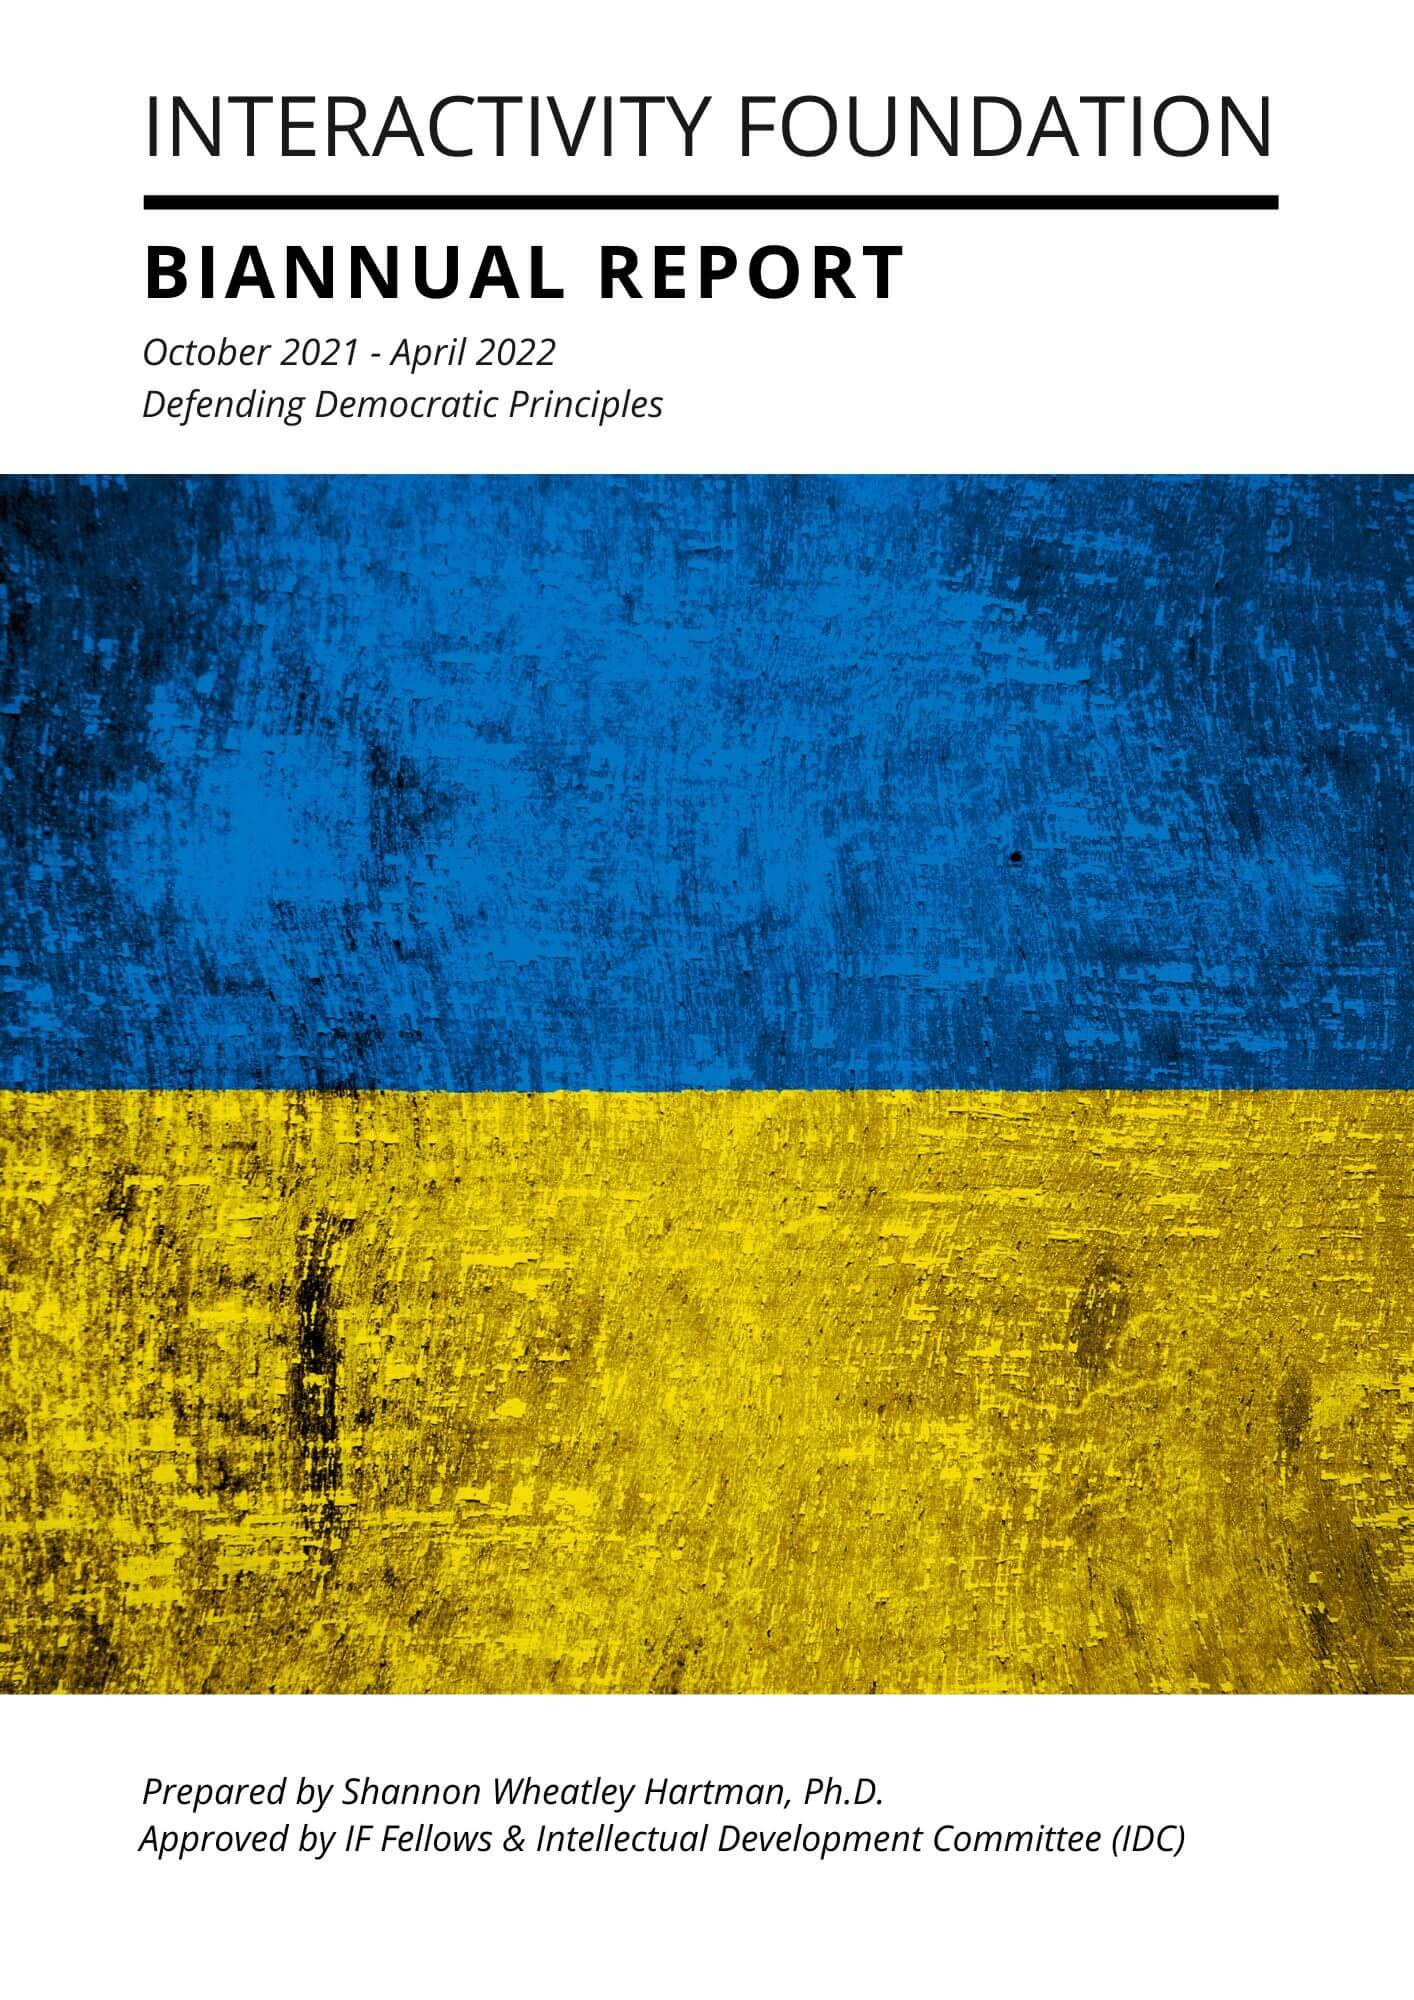 Cover Page of April 2022 Biannual Report